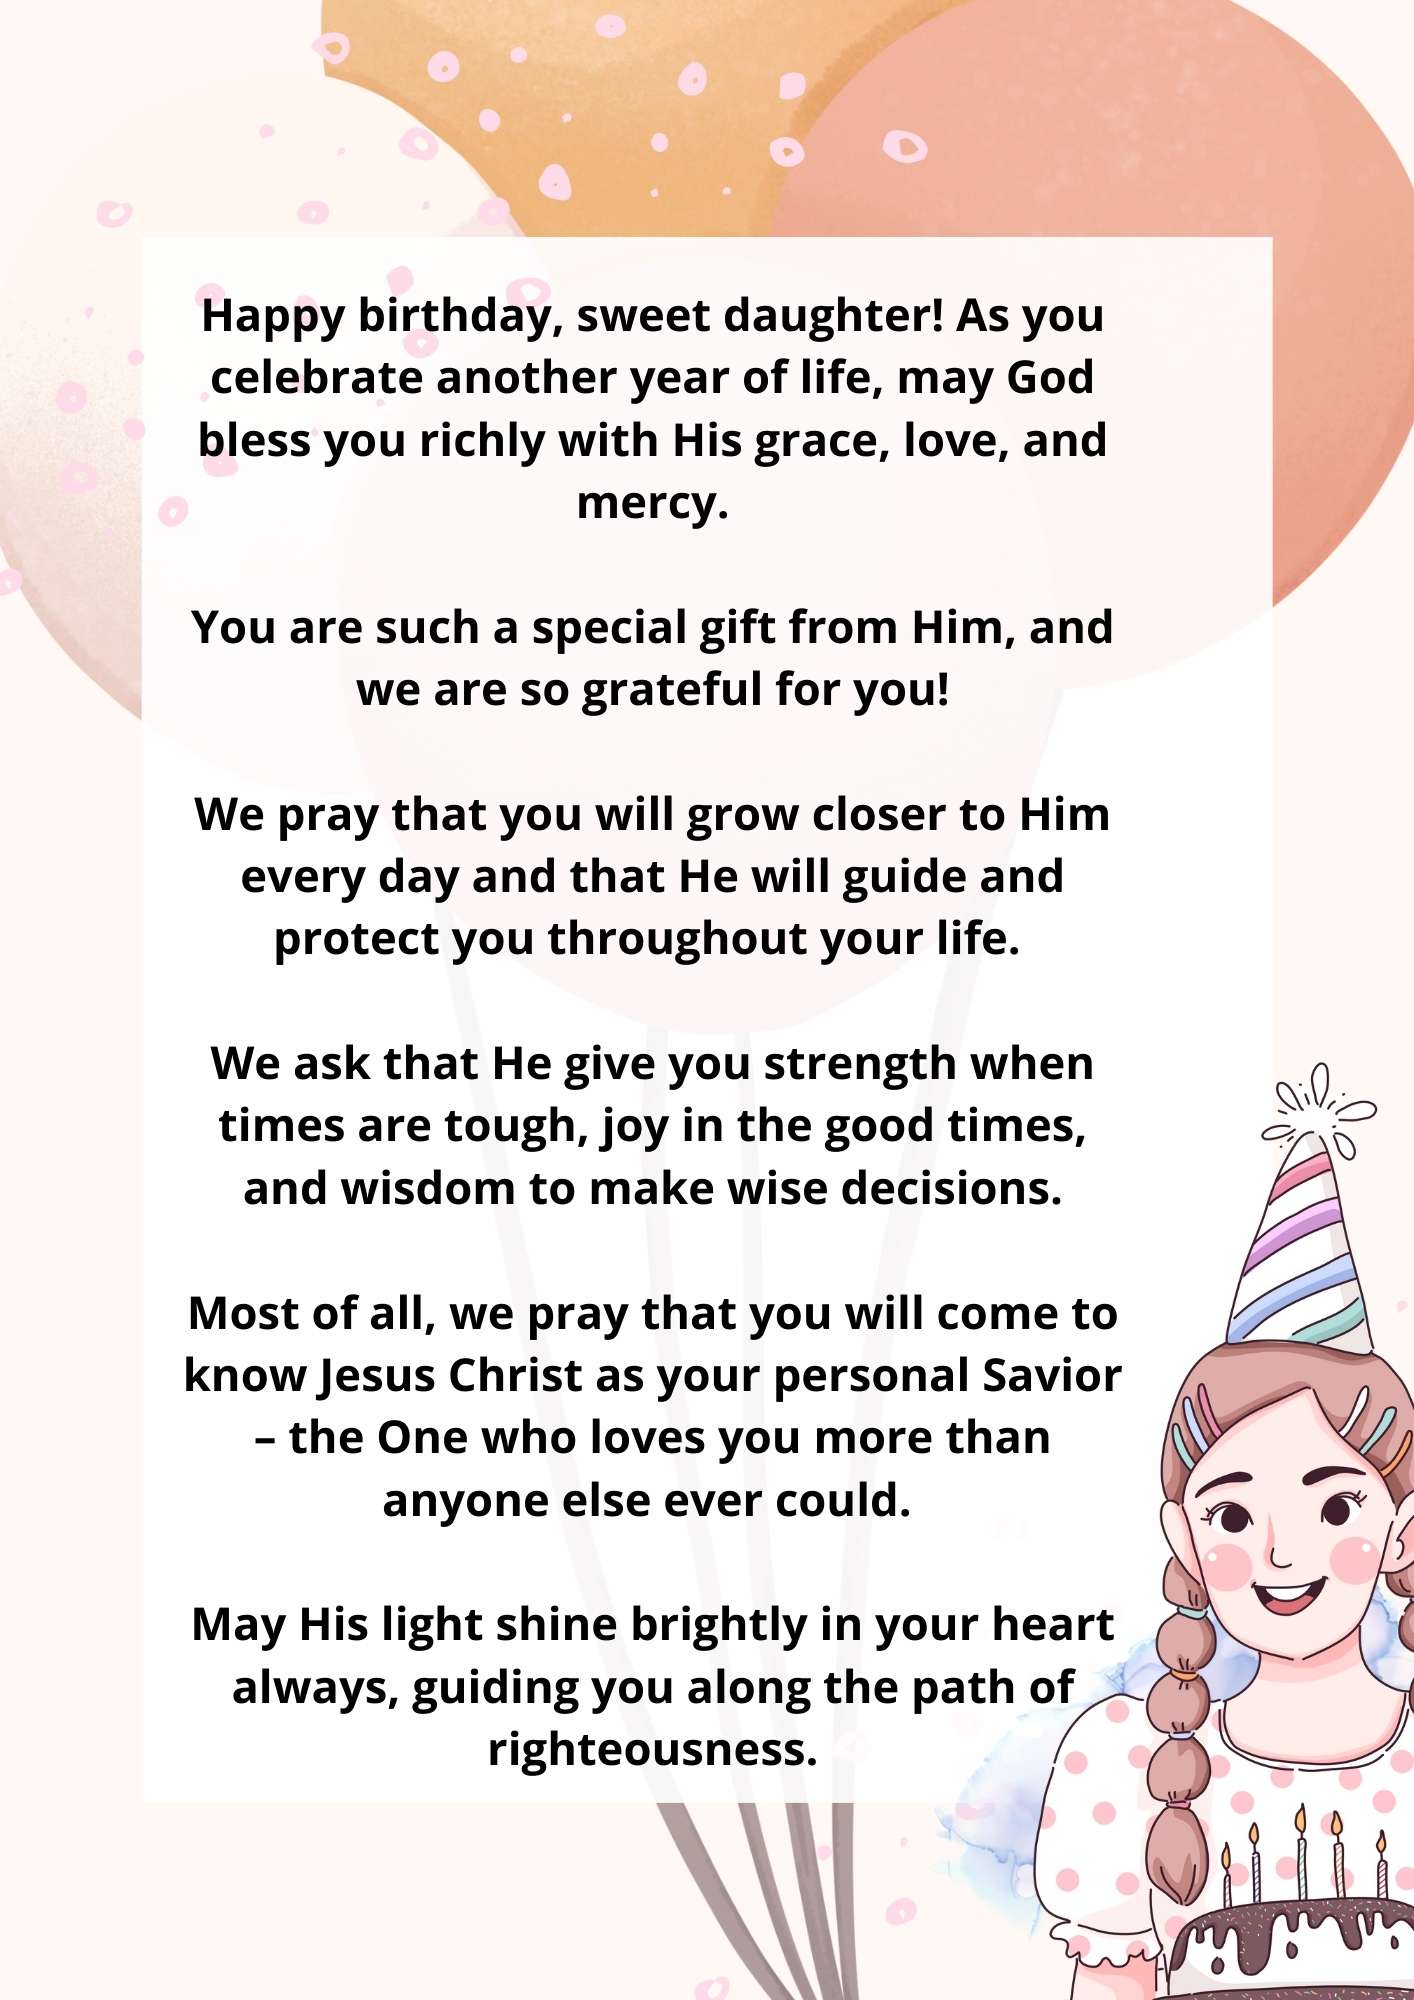 A Birthday Wishes And Prayer For Daughter